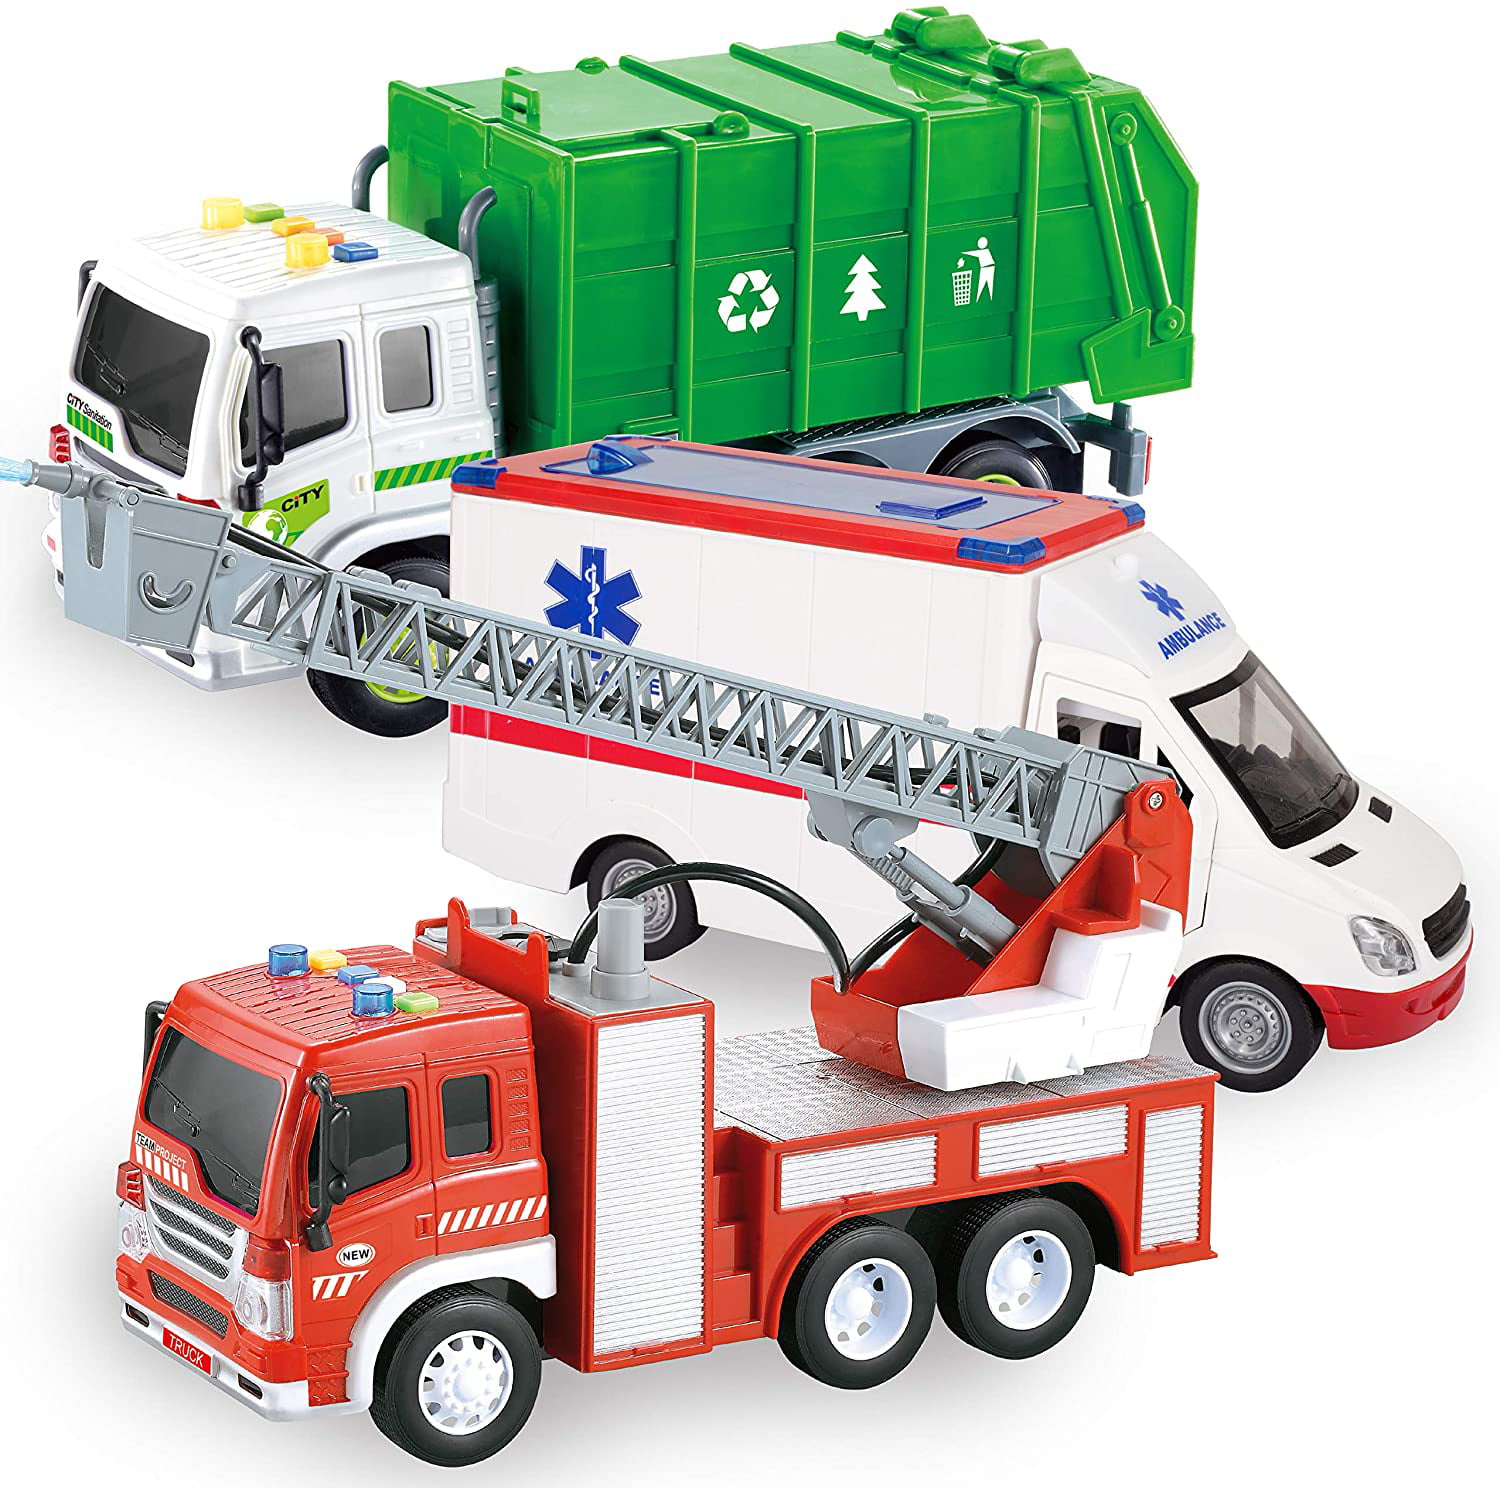 kandidatskole væv gaffel JOYIN 3 PC 1:16 Big Friction Powered City Play Vehicle Toy Set Including,  Fire Engine Rescue Truck, Ambulance, and Recycling Garbage Truck, Vehicle  Toy with Lights and Sound Siren - Walmart.com